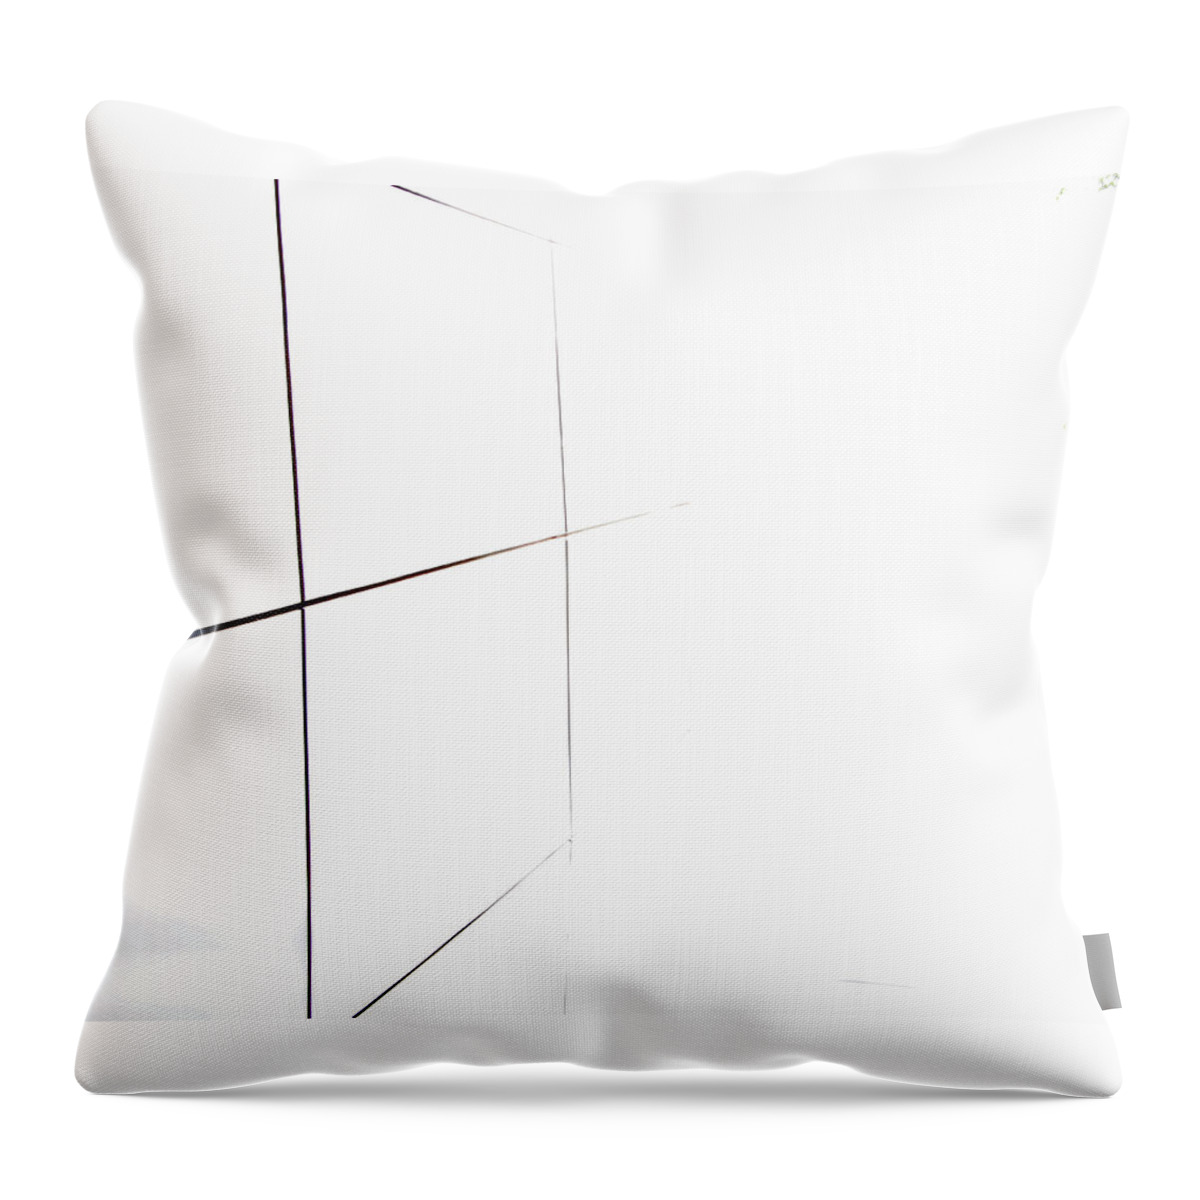 Minimalism Throw Pillow featuring the digital art Minimal Squares by Kathleen Illes